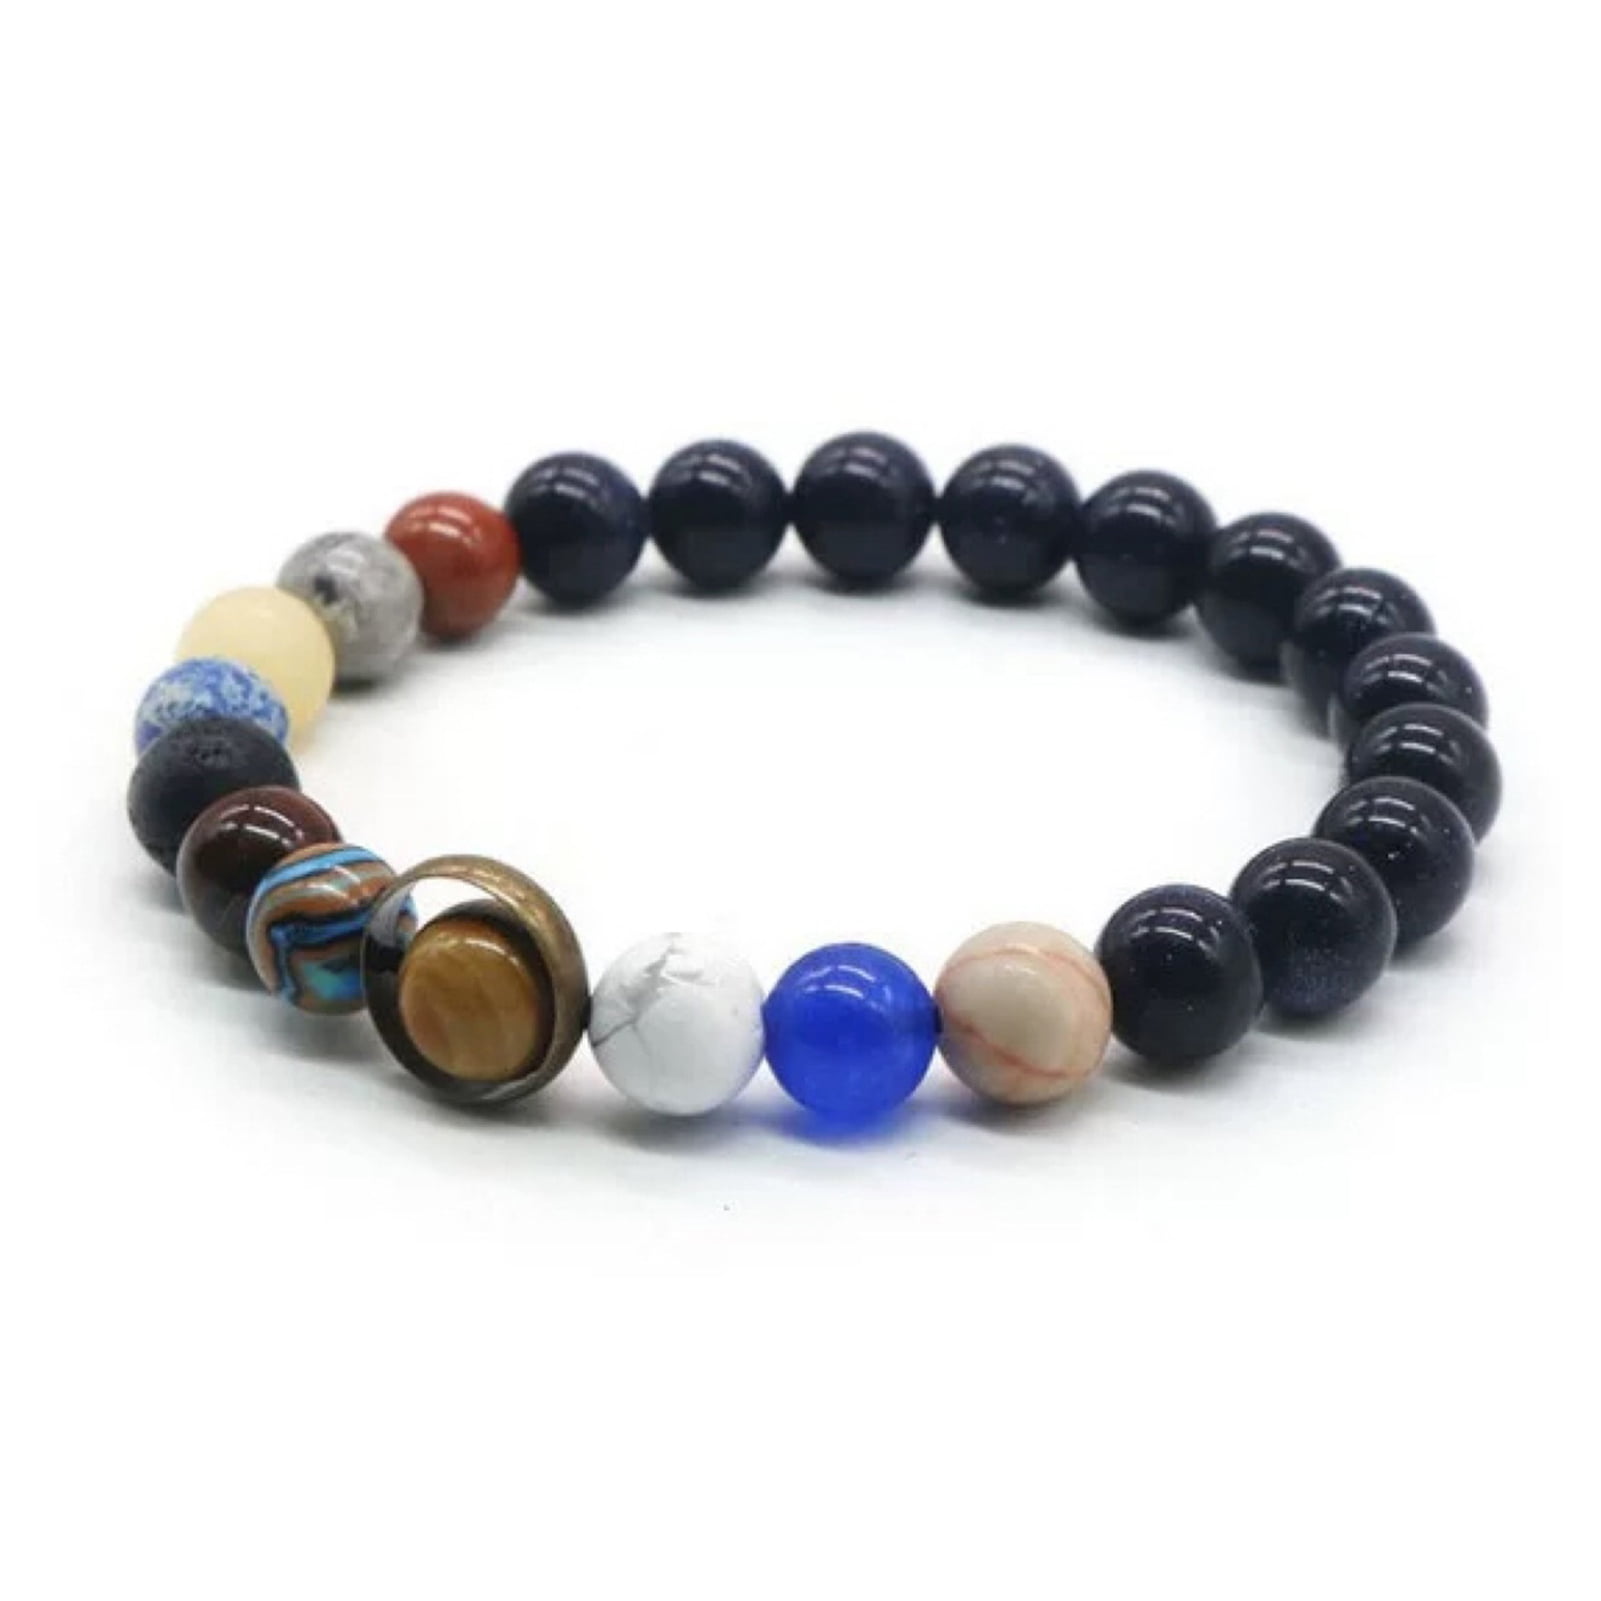 Mightlink Planet Bracelet Beaded Eight Planets Faux Volcanic Stone Colorful Geometric Best Friends Gift Men Women Universe Solar System Beads Jewelry 34502edd fcfe 46ef 800e e3346be1e24f.a1b4238352eb49a3d4e4f274a7d33ccb